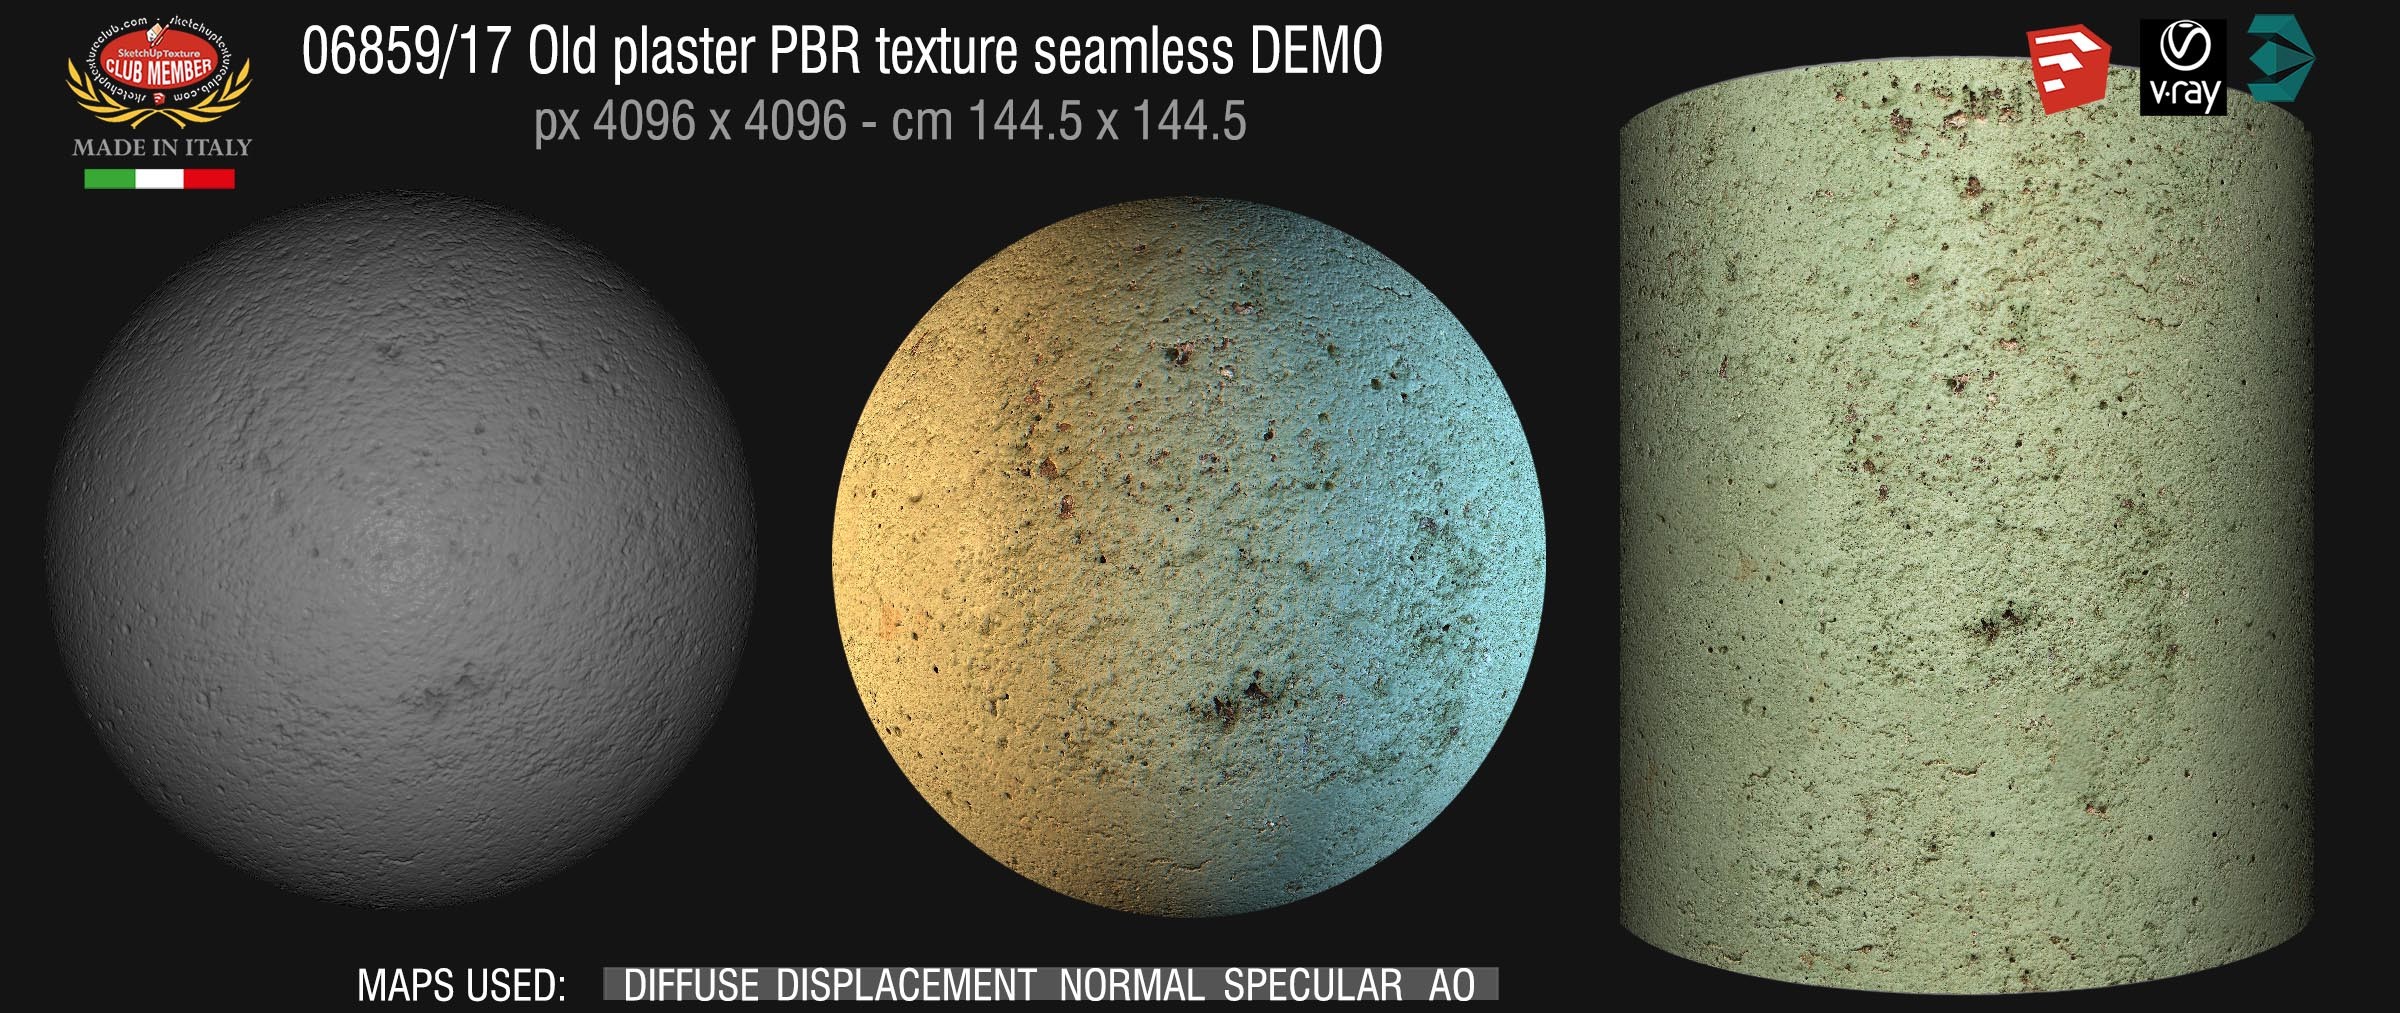 06859_17 Old plaster PBR texture seamless DEMO